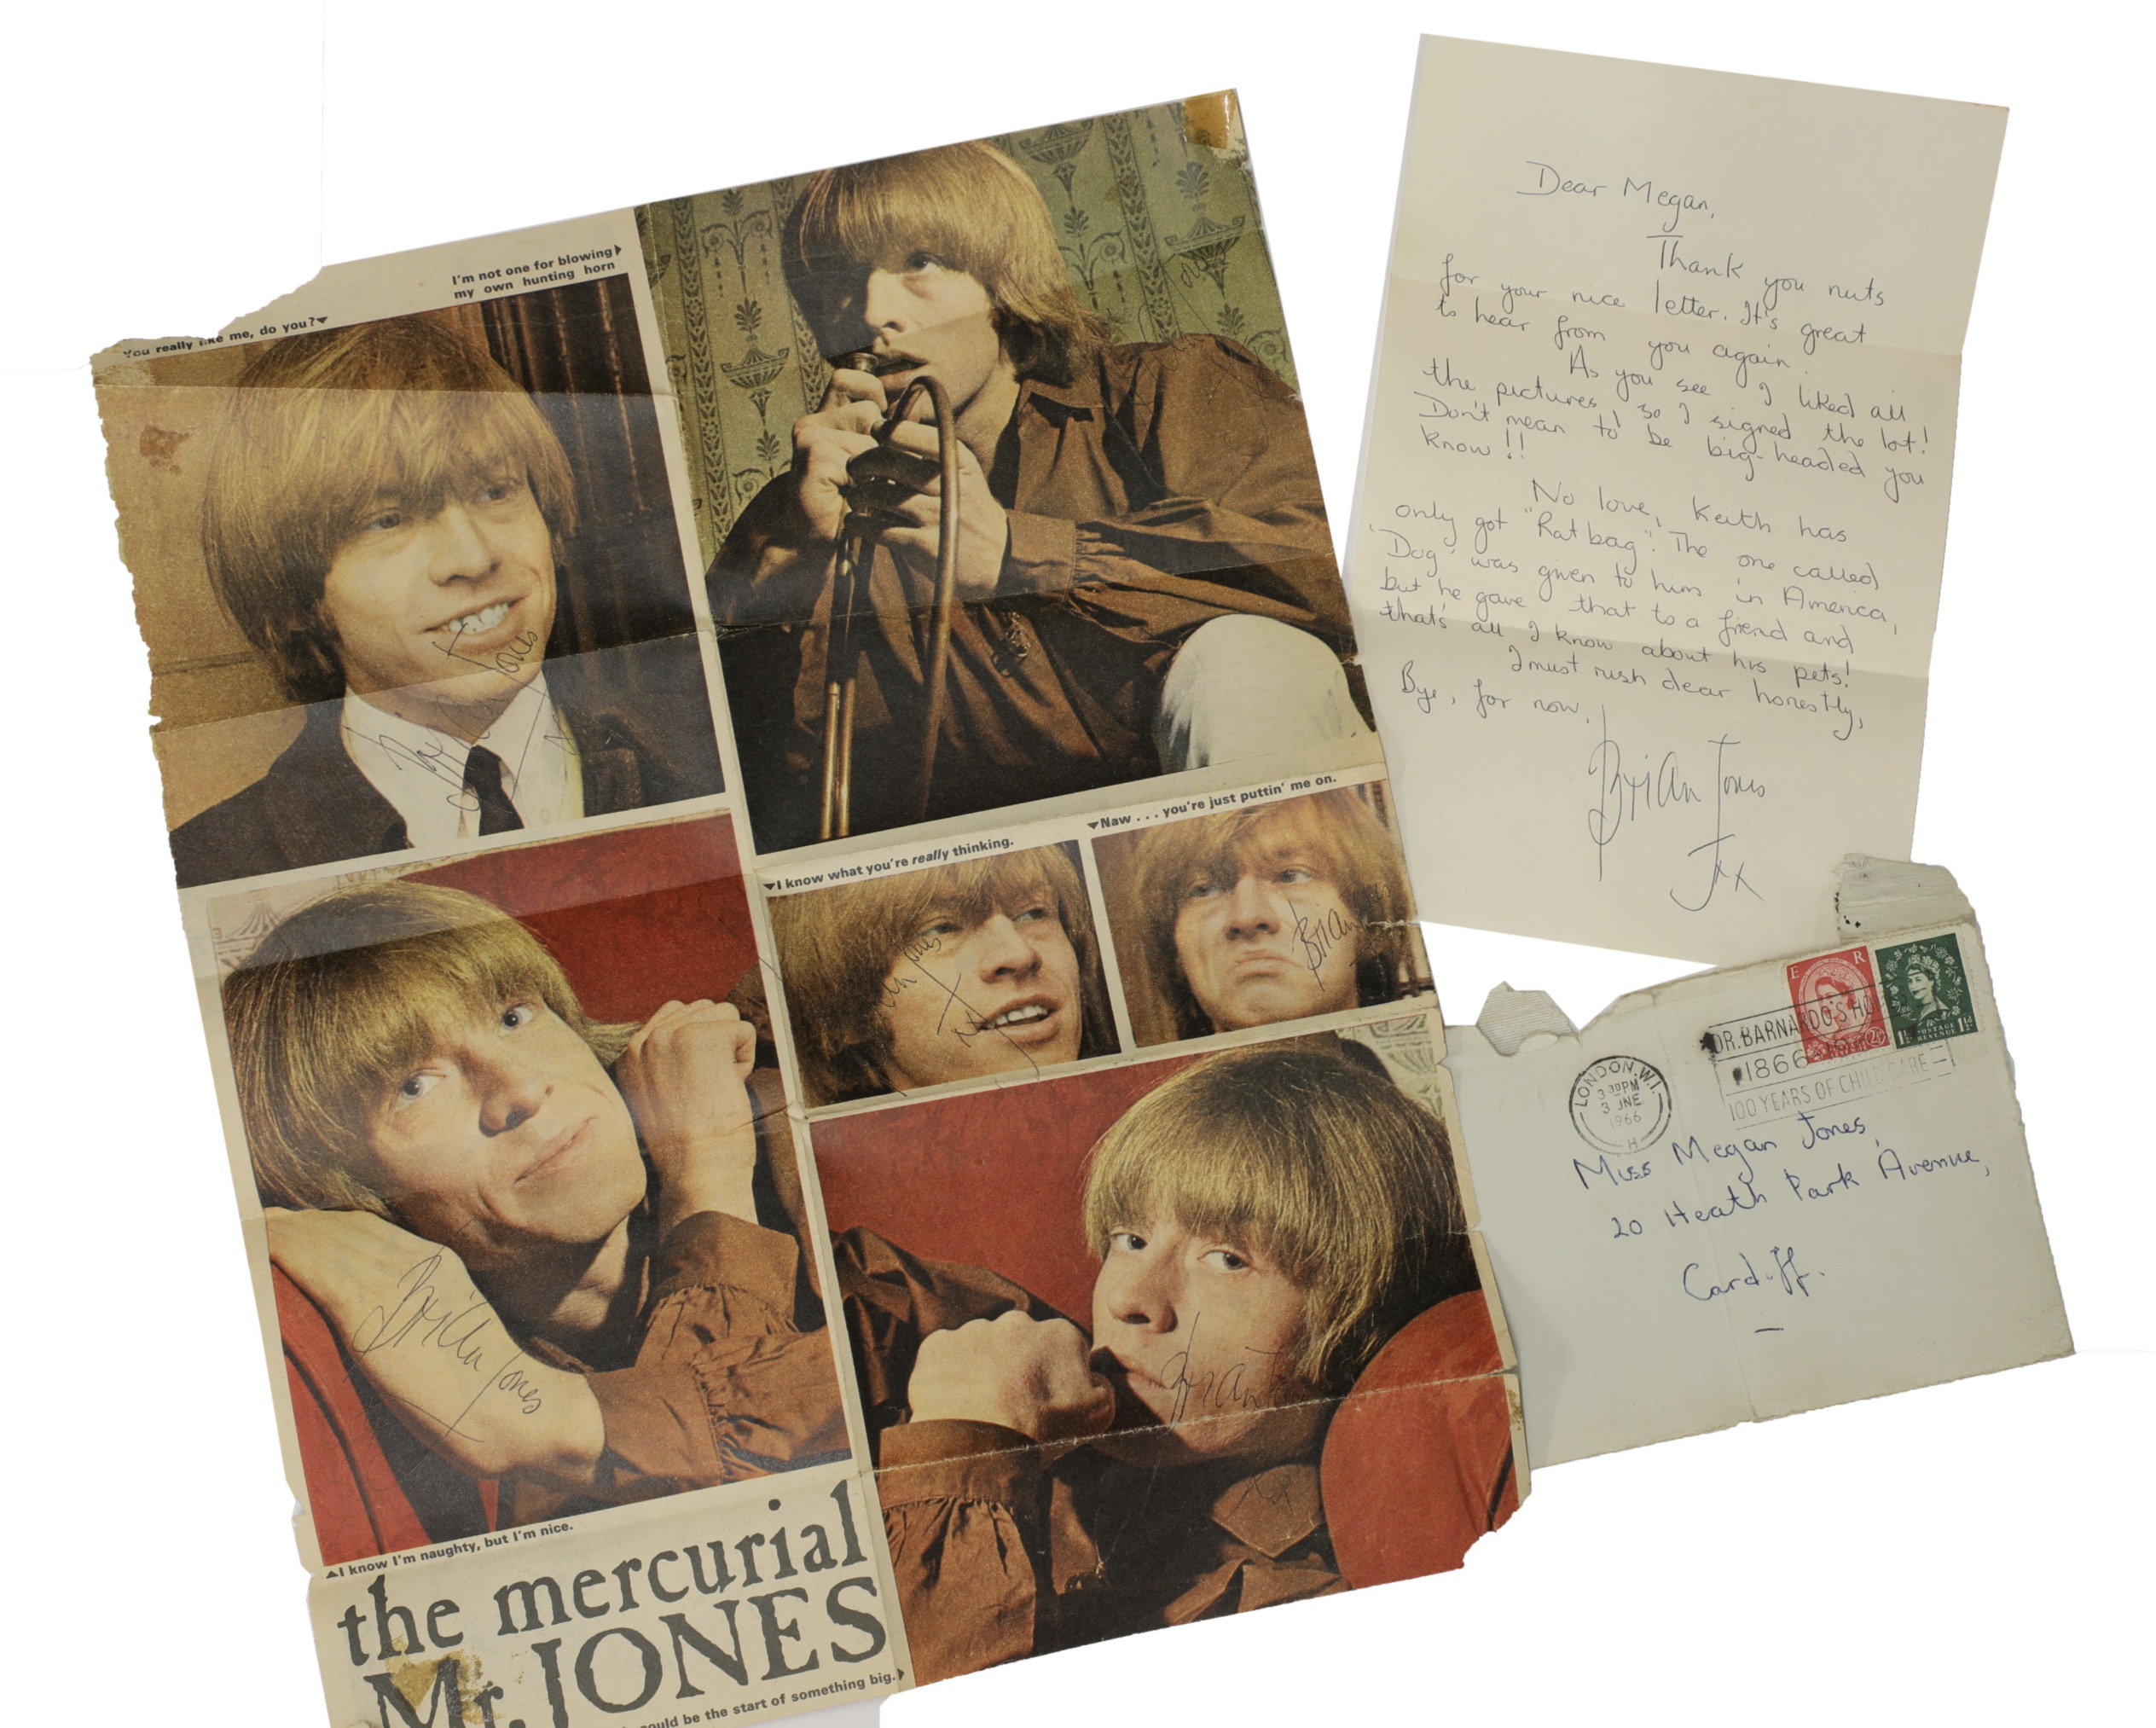 Letters from Brian Jones of the Rolling Stones to a fan